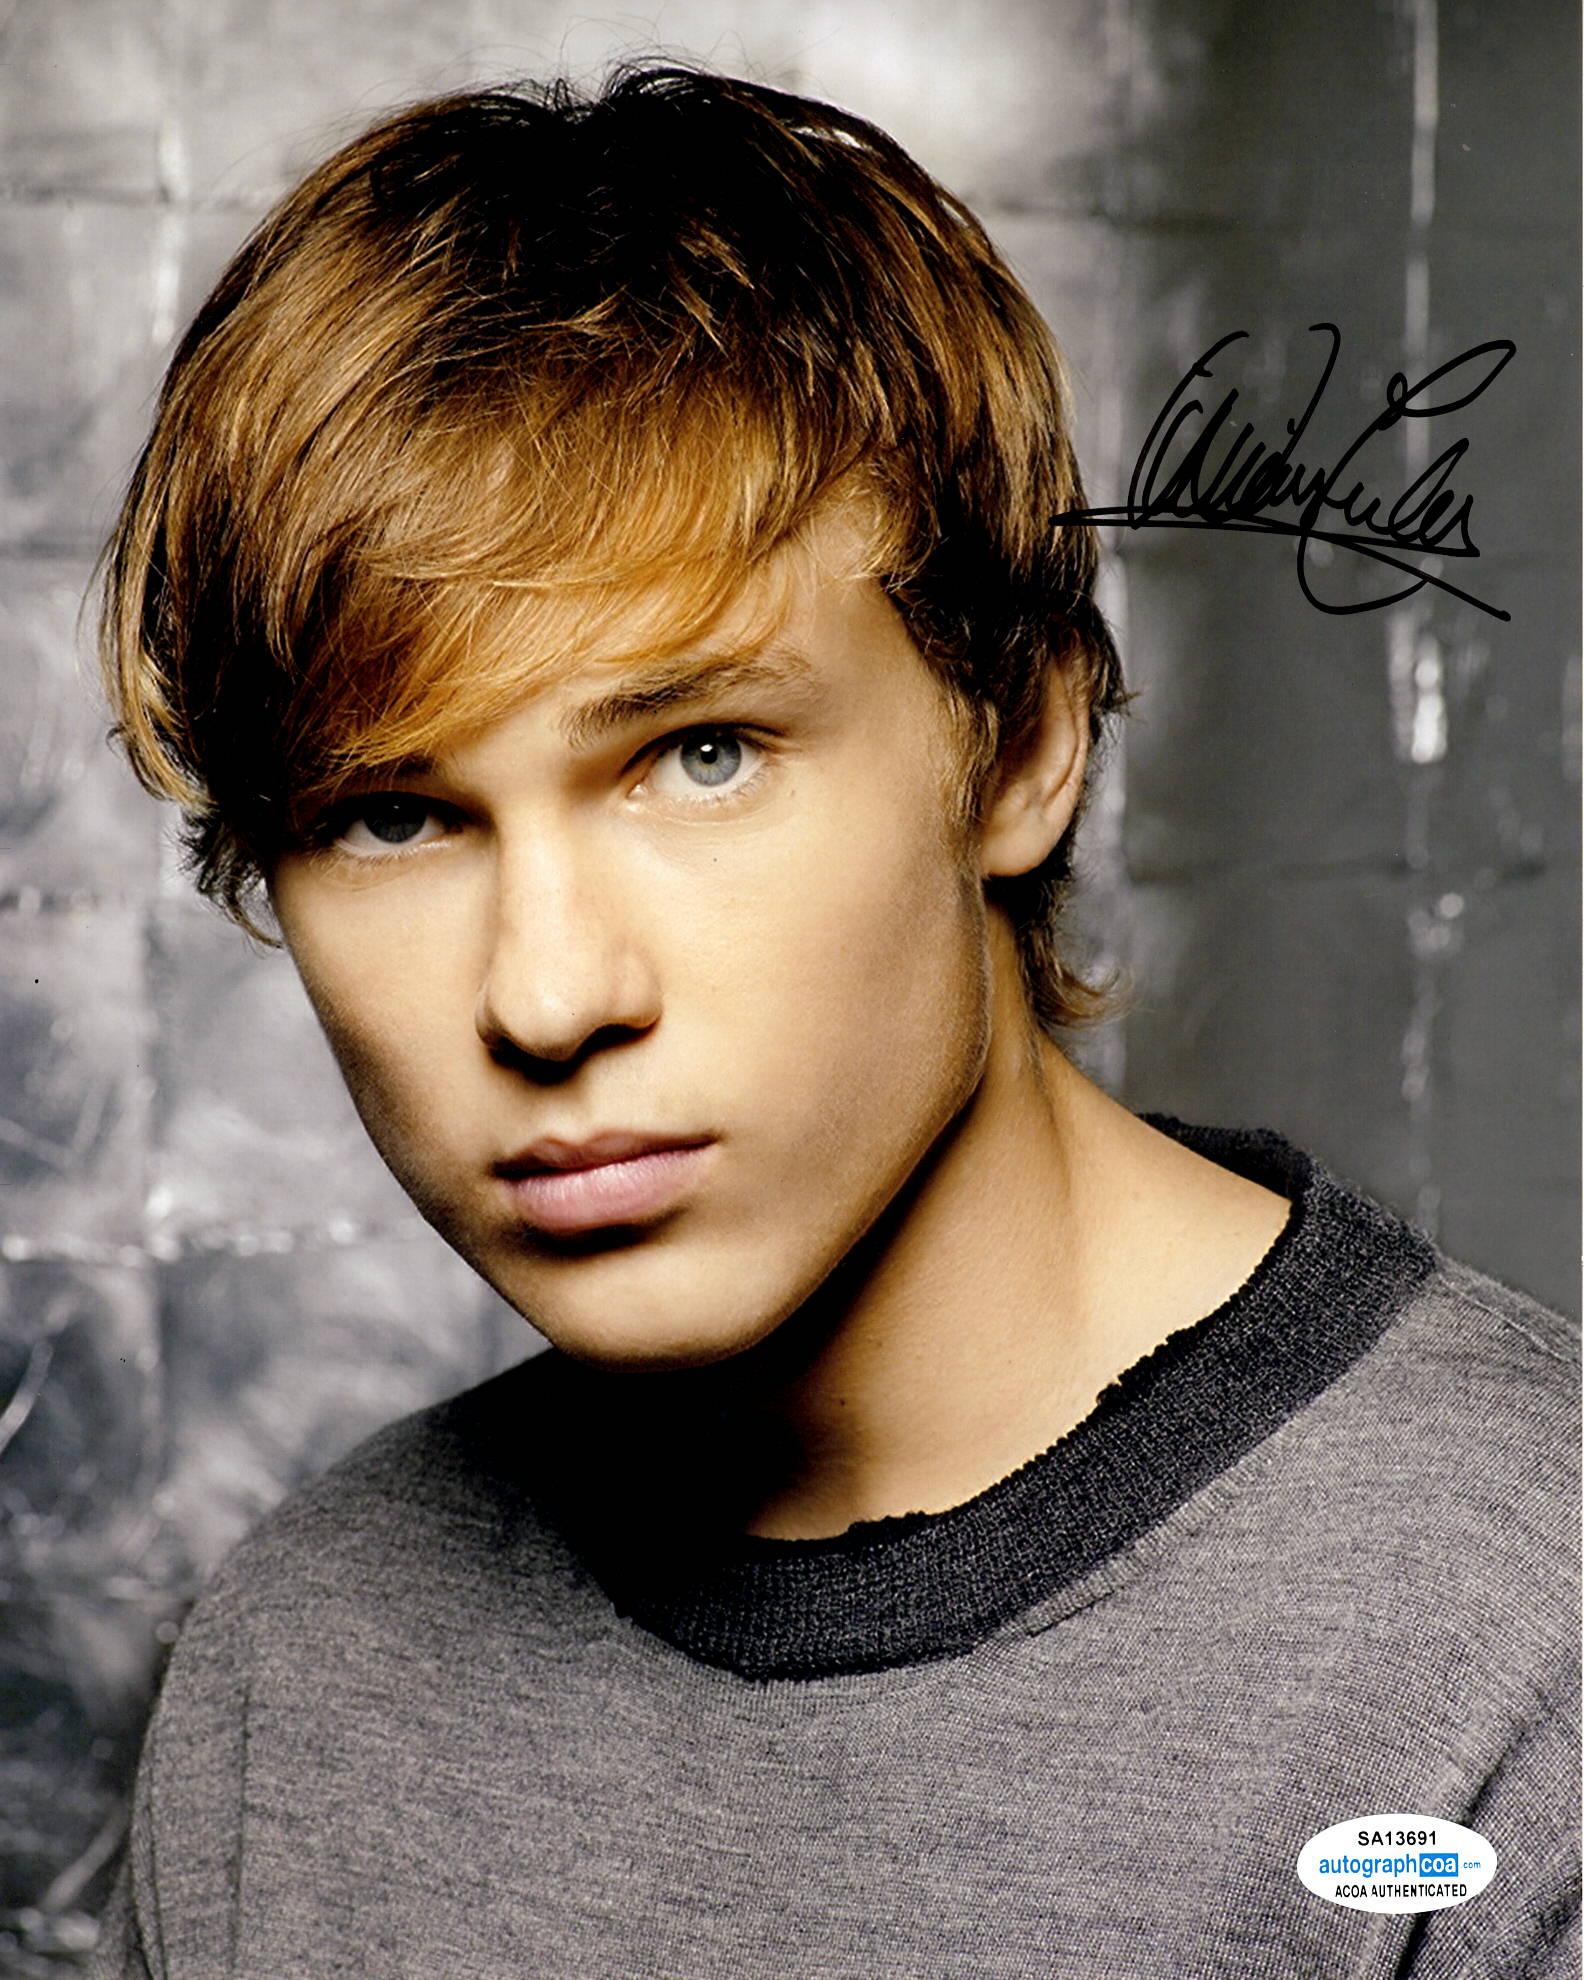 William Moseley Chronicles of Narnia Royals Signed Autograph 8x10 Photo #2 - Outlaw Hobbies Authentic Autographs